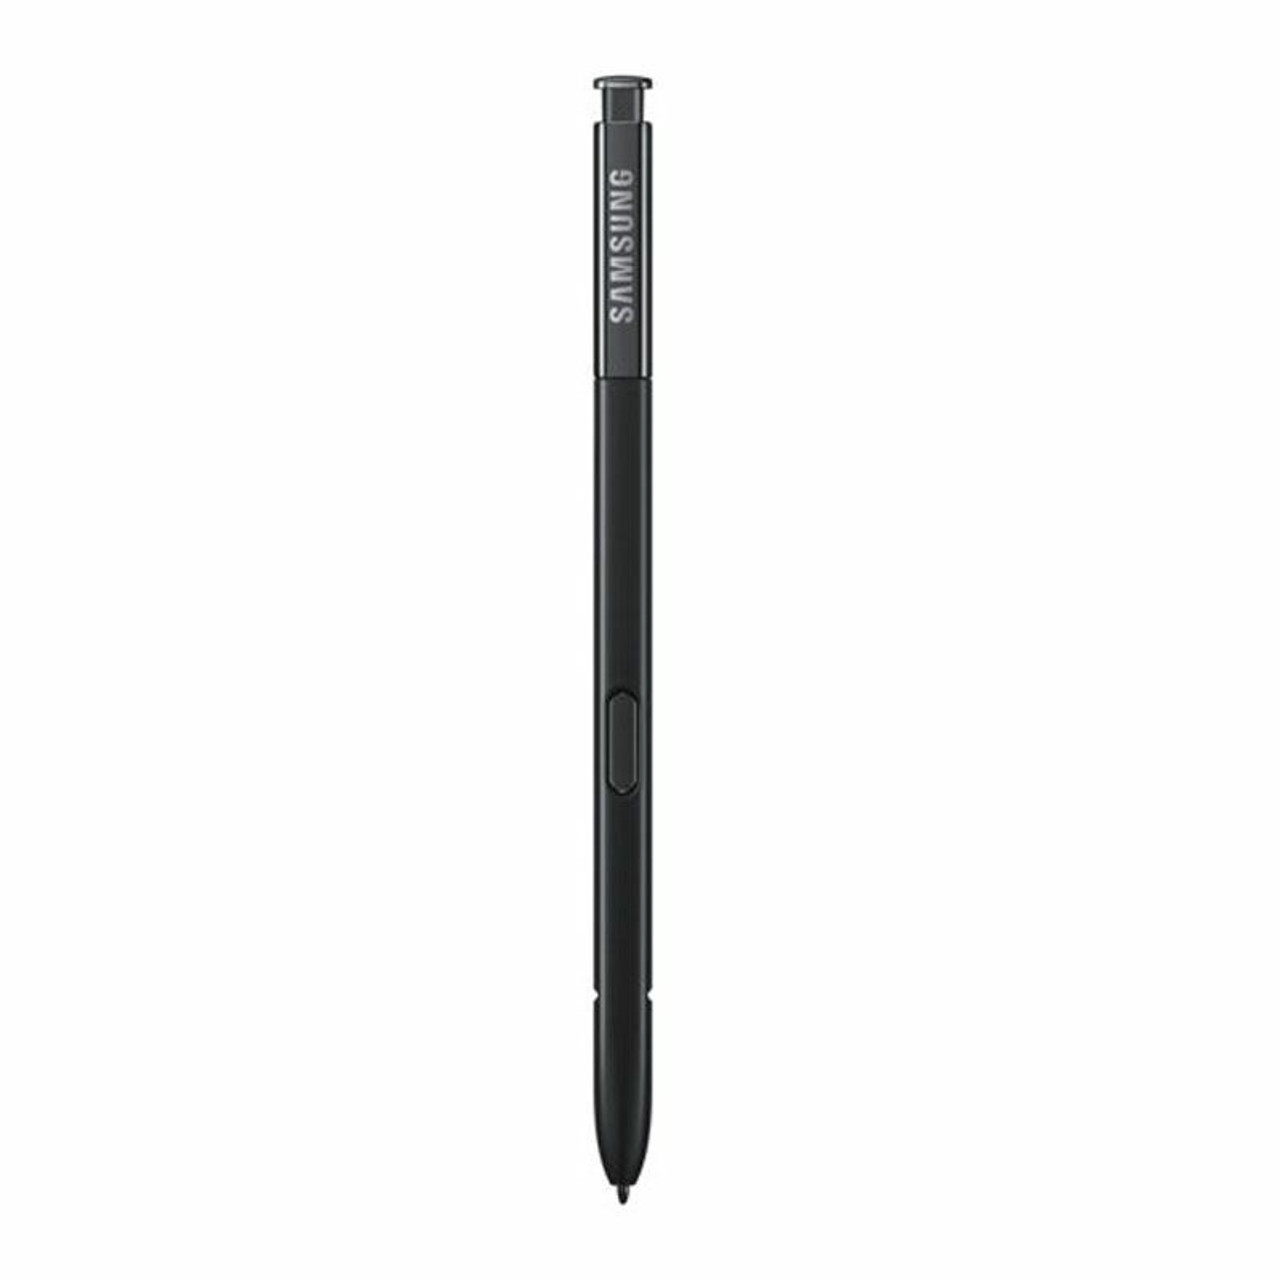 Official Samsung Galaxy Note 8 Stylus S Pen